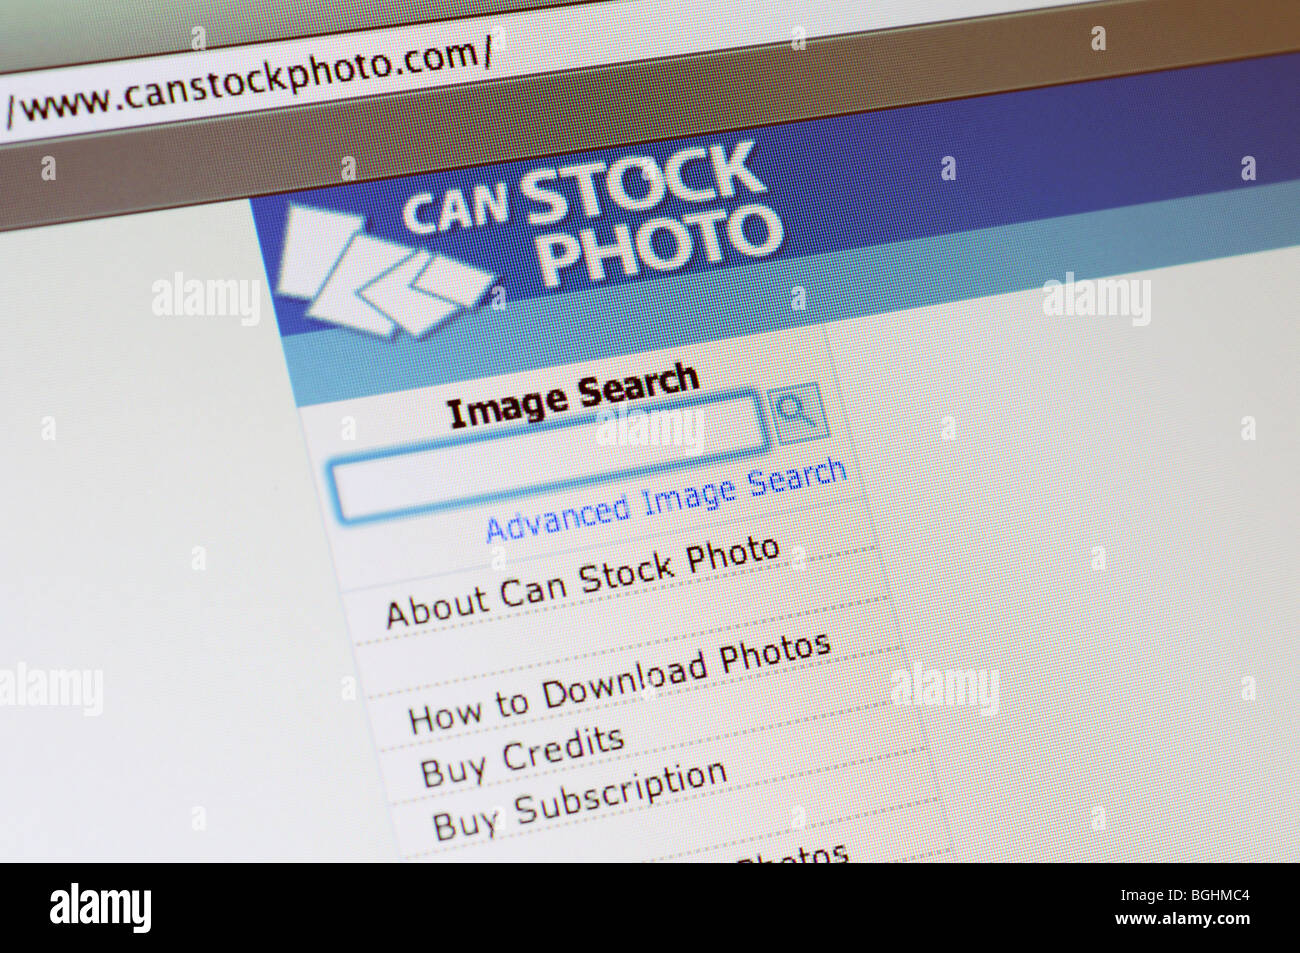 CanStock image agency website Stock Photo